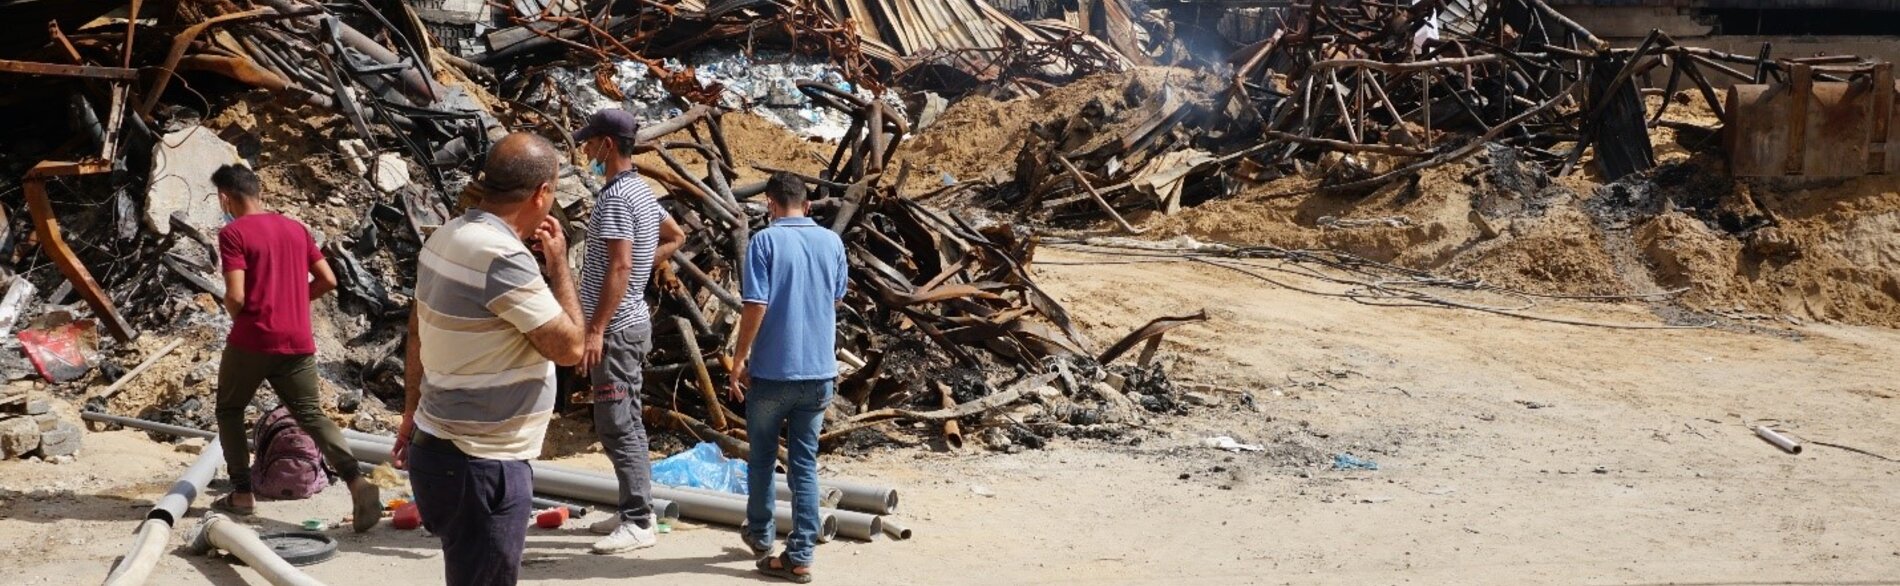 The destroyed agrochemical warehouse, July 2021. Photo by OCHA.